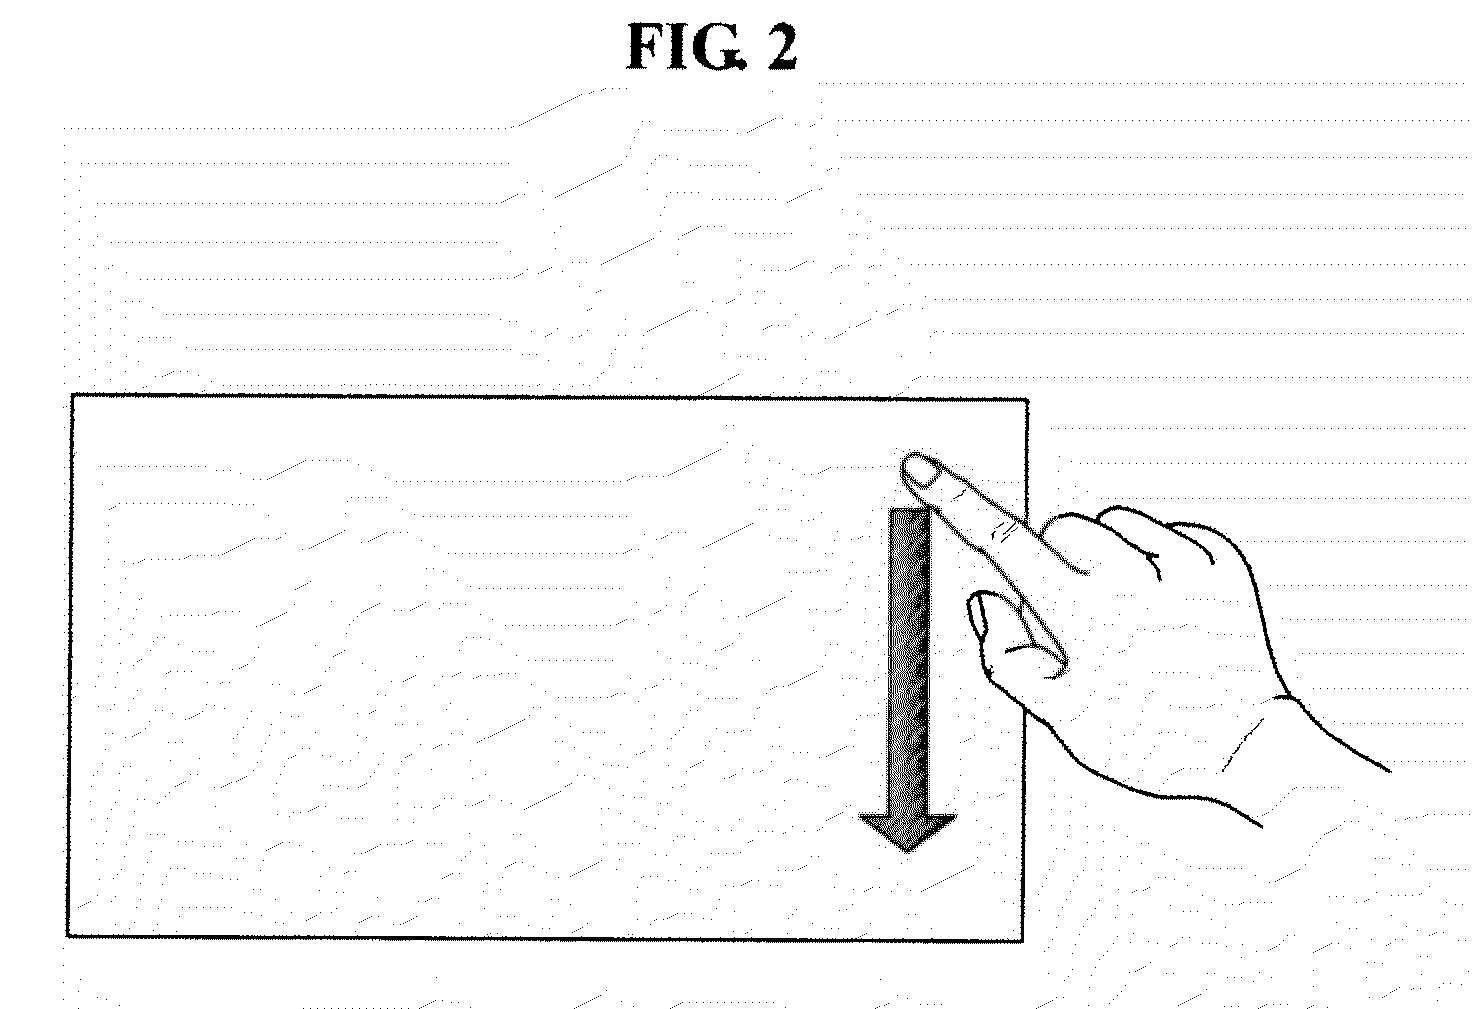 Ultrasound diagnosis apparatus using touch interaction